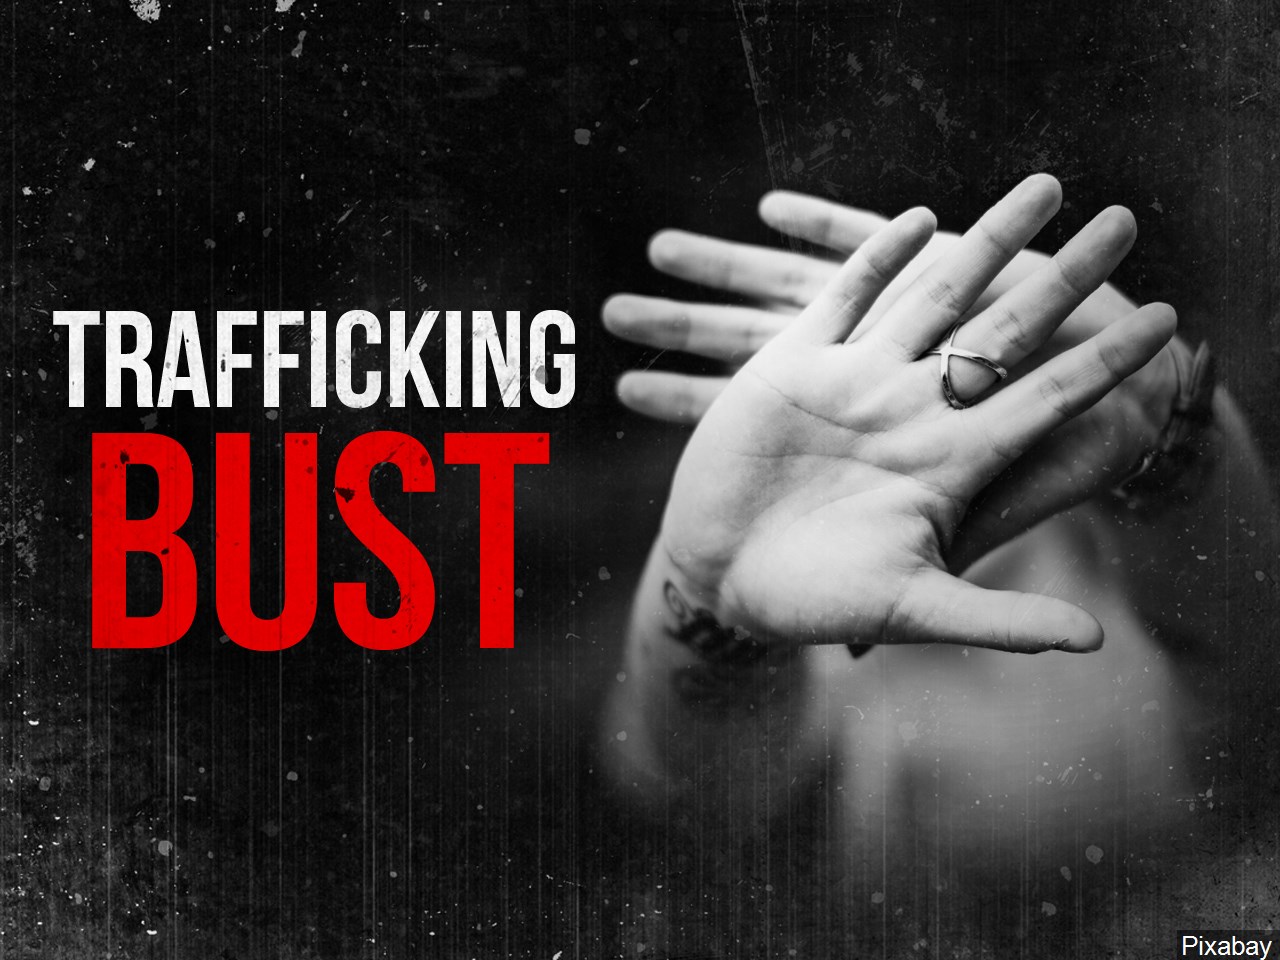 Lpd Multiple Sex Trafficking Arrests Made In Lincoln 0387